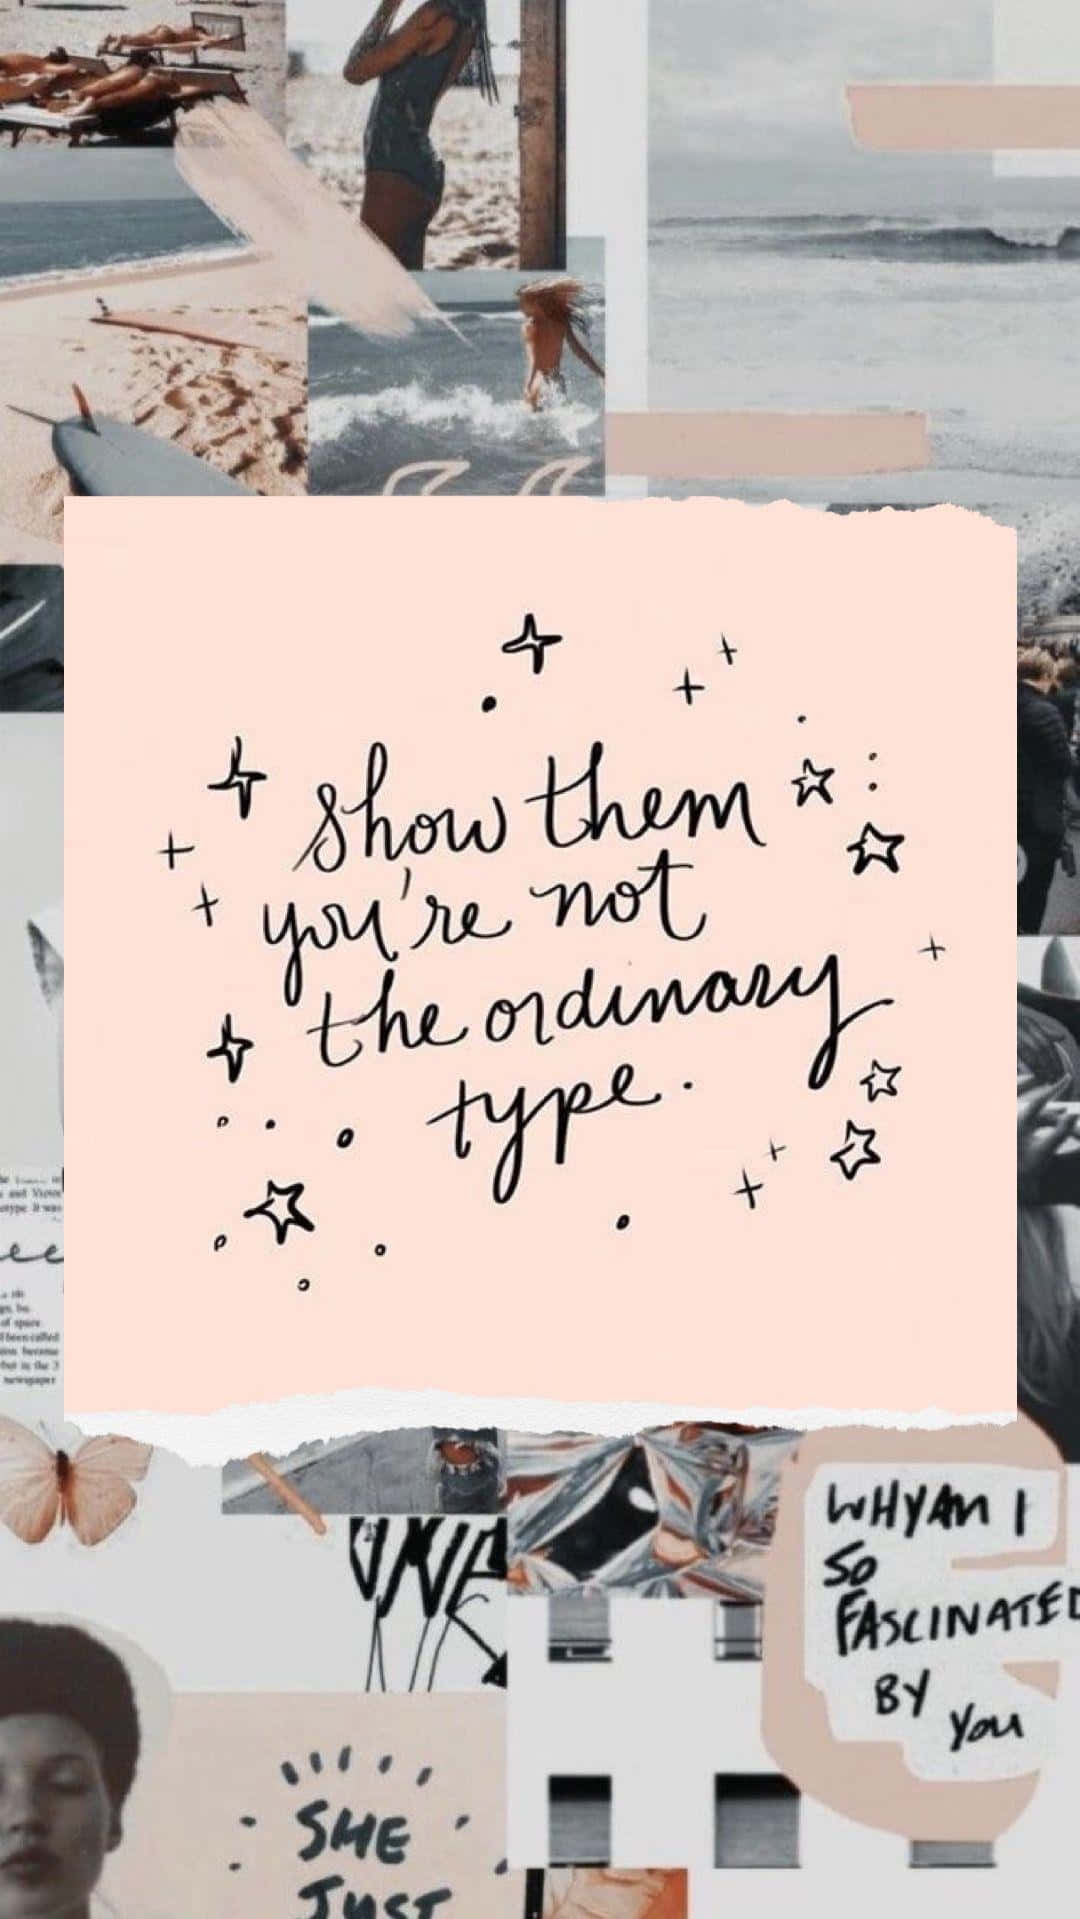 Not Ordinary Type_ Inspirational Quote Collage.jpg Wallpaper